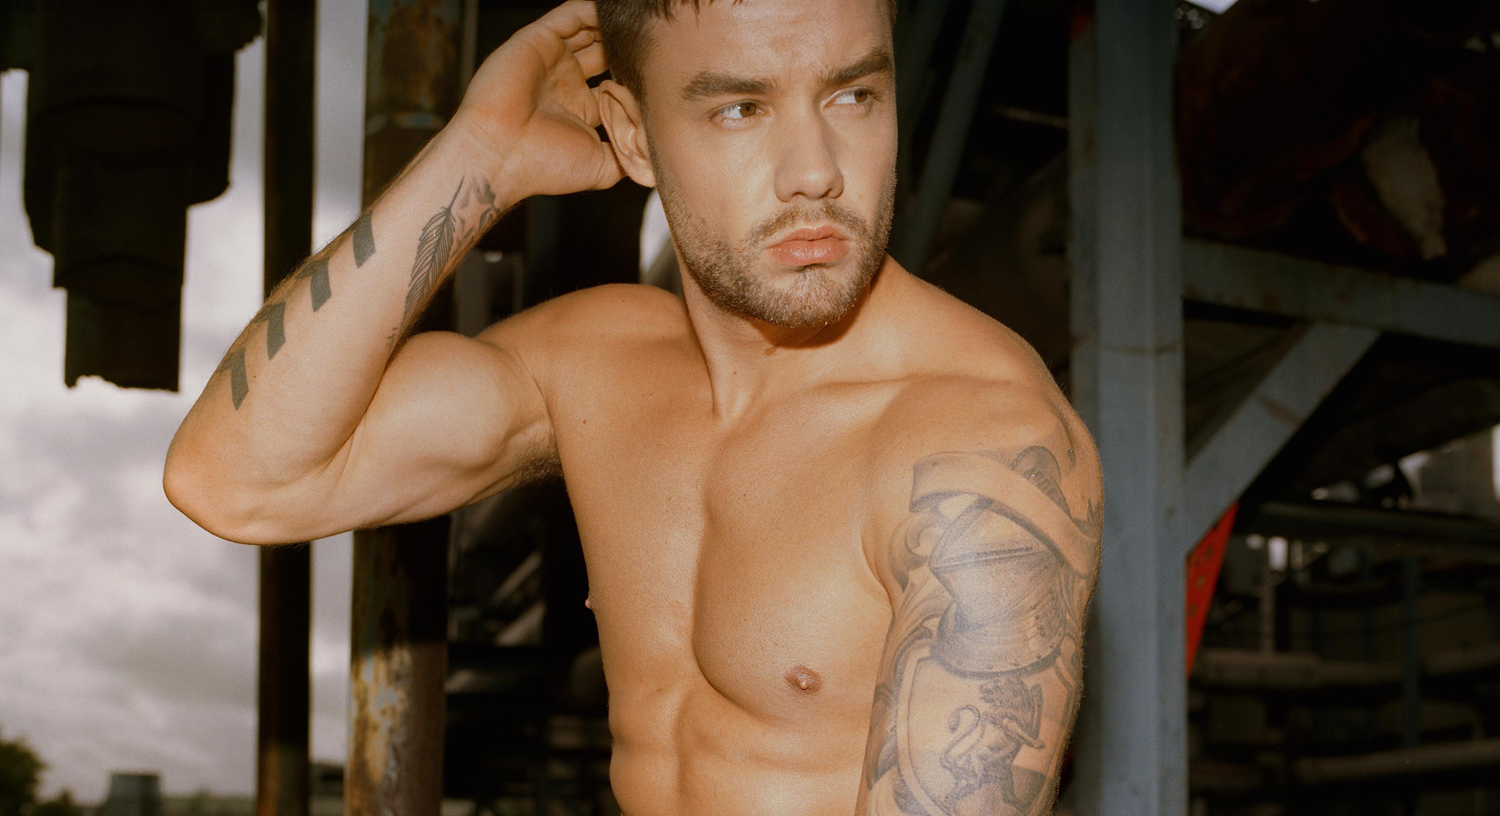 Liam Payne Dances & Works Out While Shirtless On a Yacht 